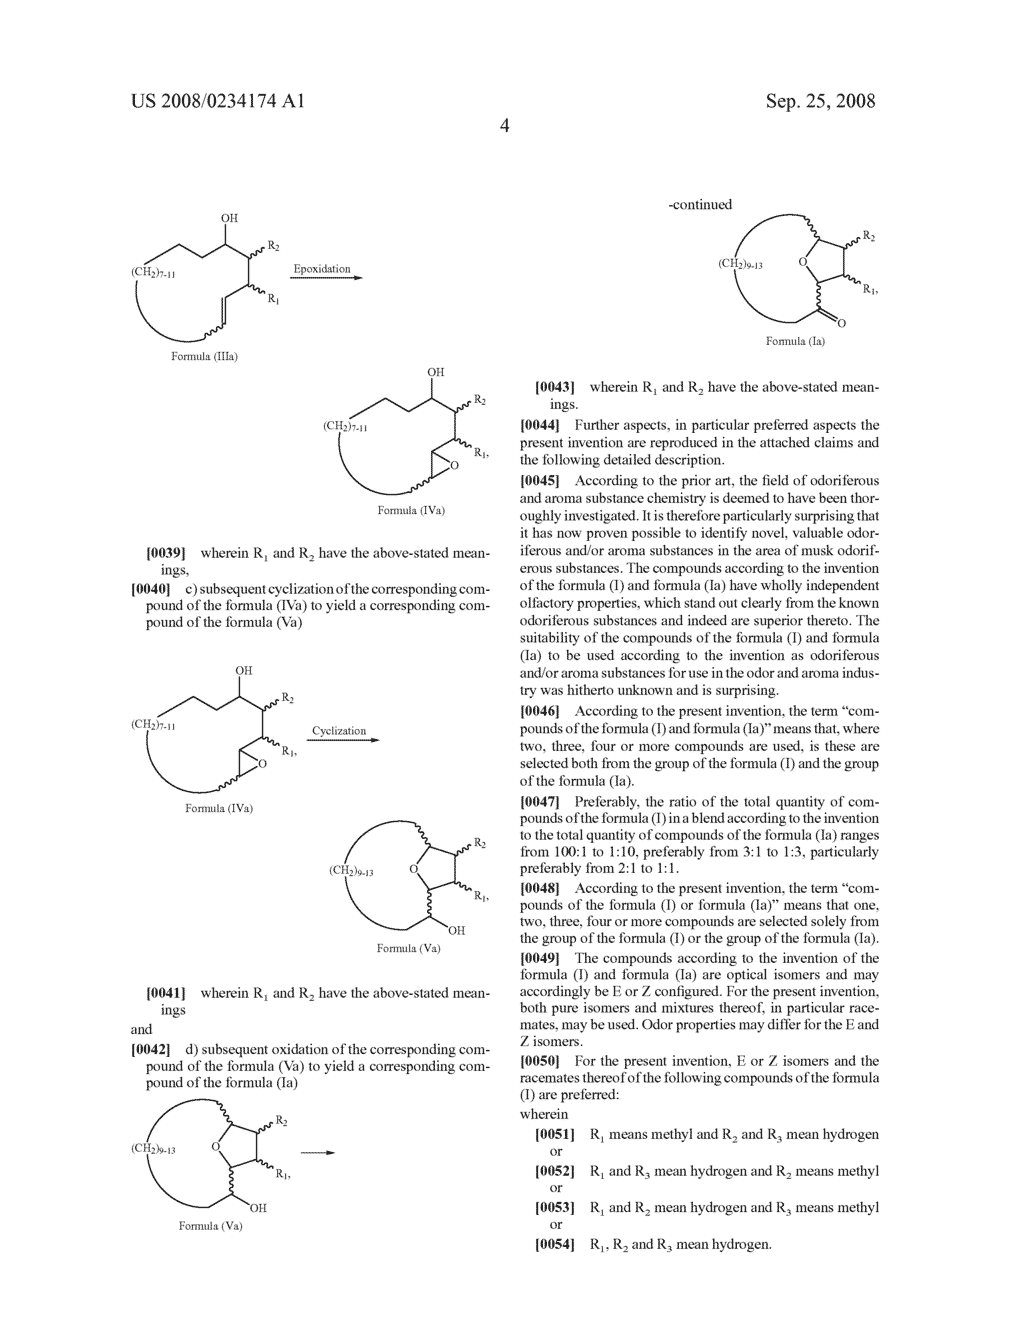 FURANOID AND PYRANOID C14-C18- OXABICYCLOALKANONES AS ODORIFEROUS AND/OR AROMA SUBSTANCES - diagram, schematic, and image 05